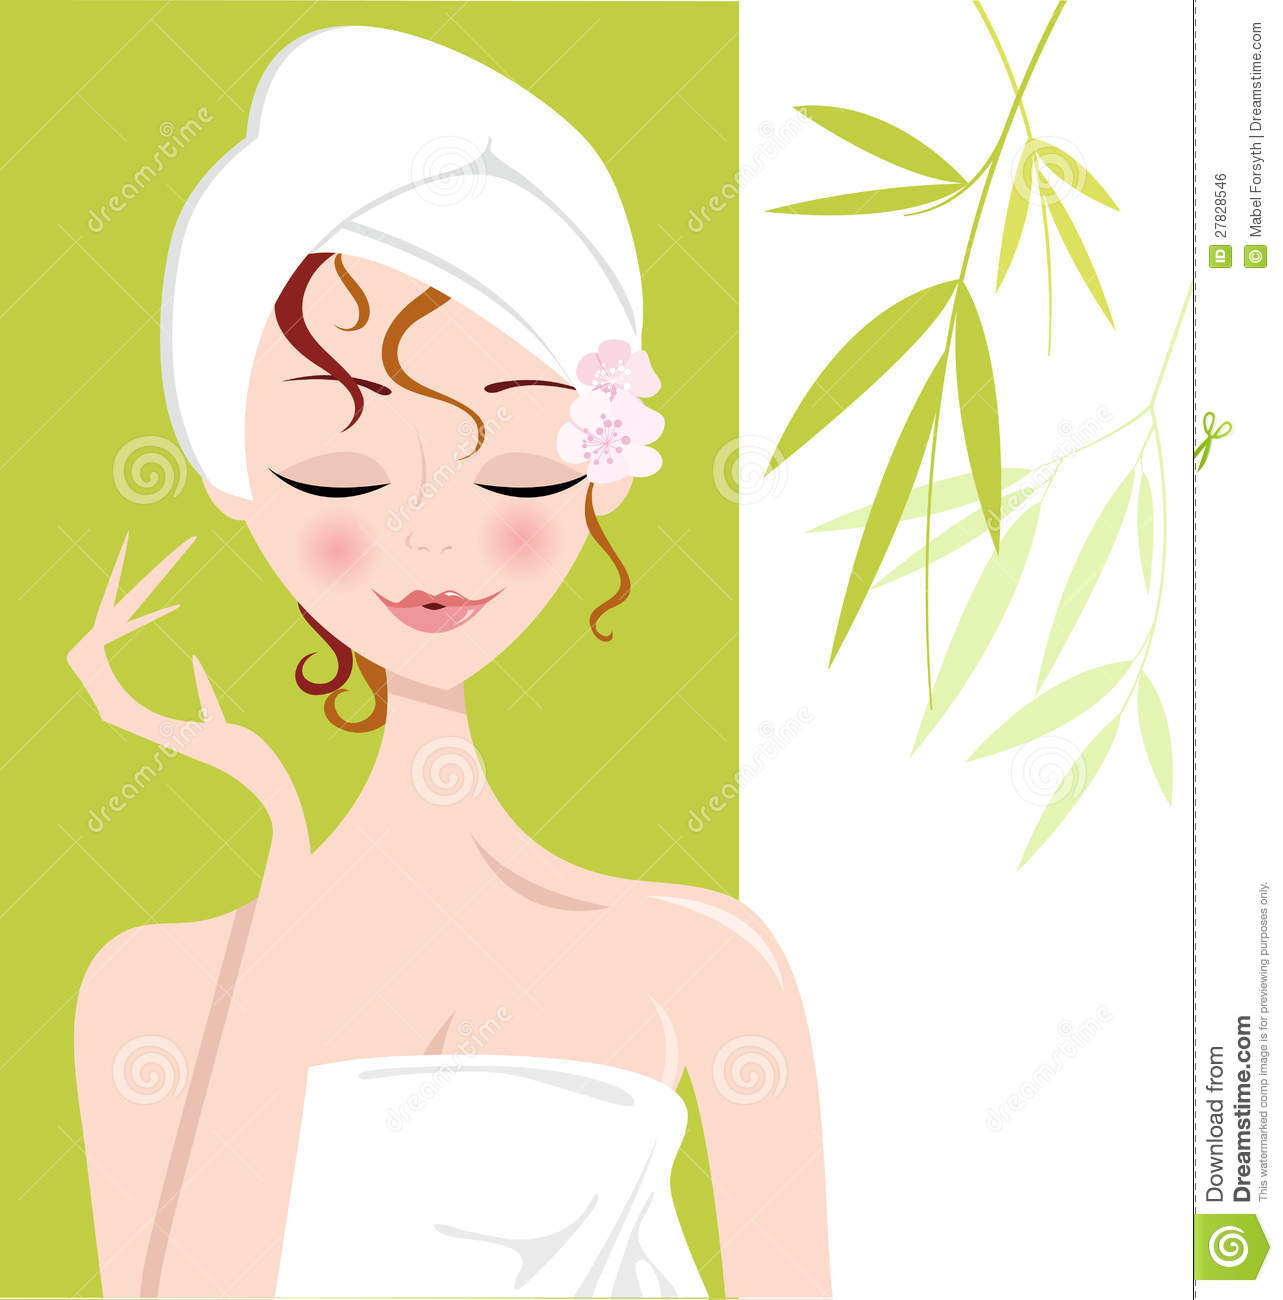 Spa Girl Relaxing With Towel Wrap Royalty Free Stock Image   Image